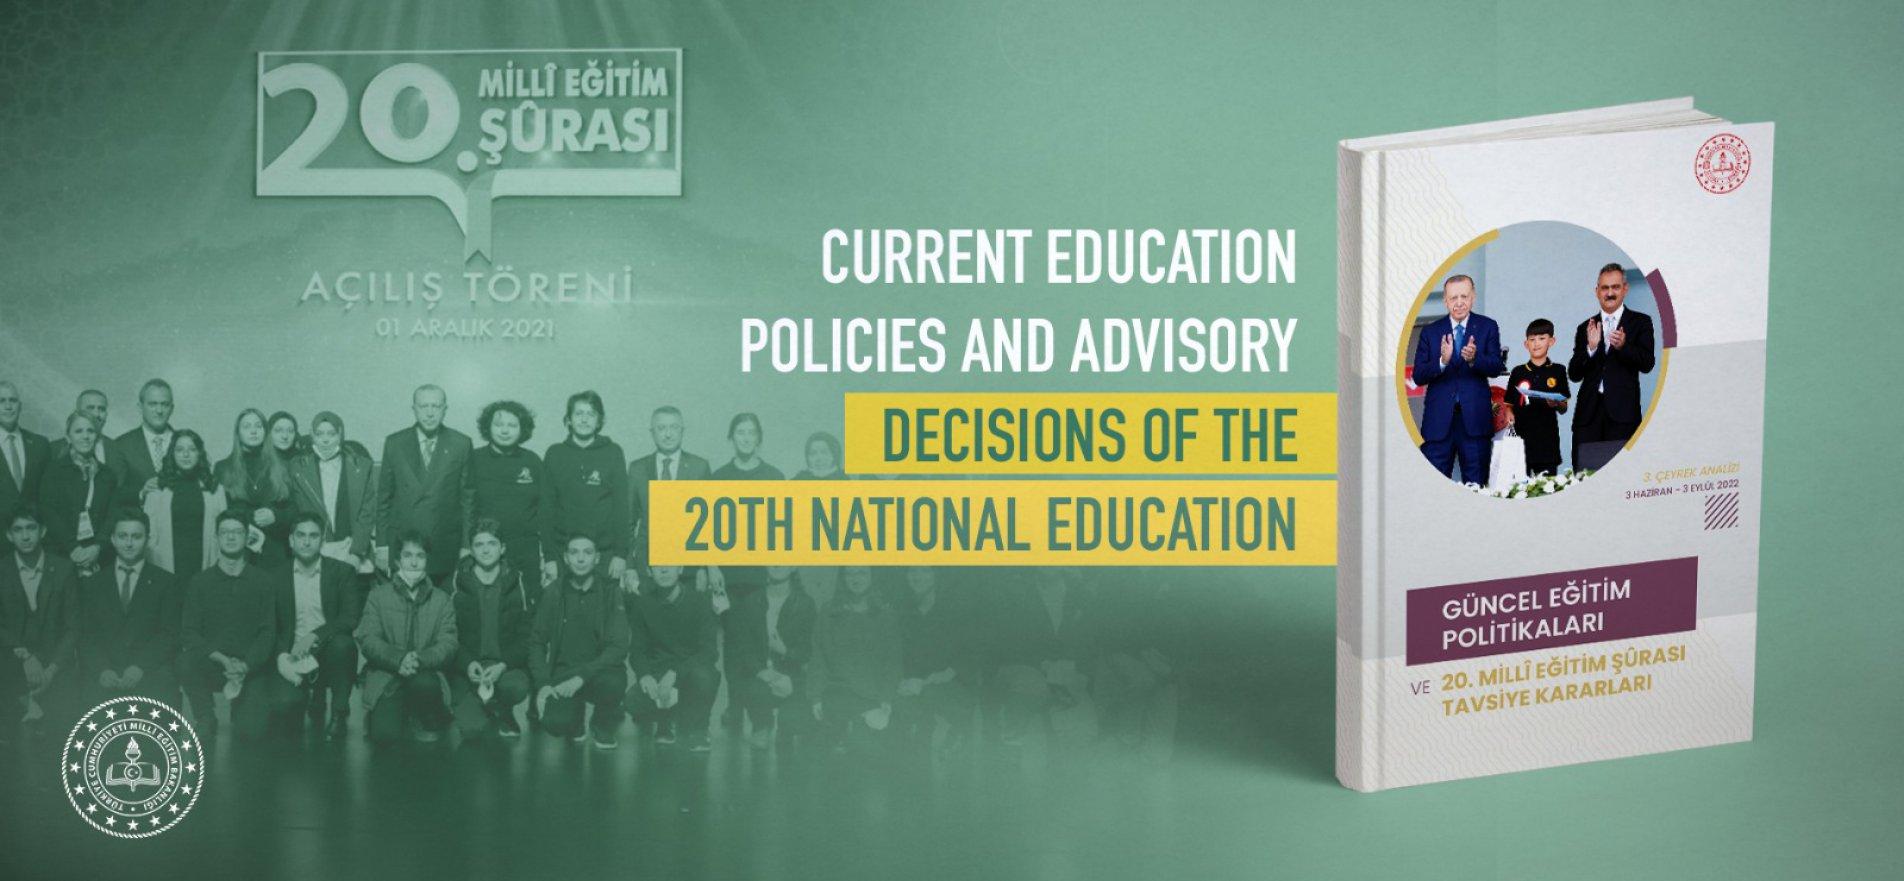 TIE BETWEEN THE 20TH NATIONAL EDUCATION RECOMMENDATIONS AND EDUCATION POLICIES IS BOOSTED